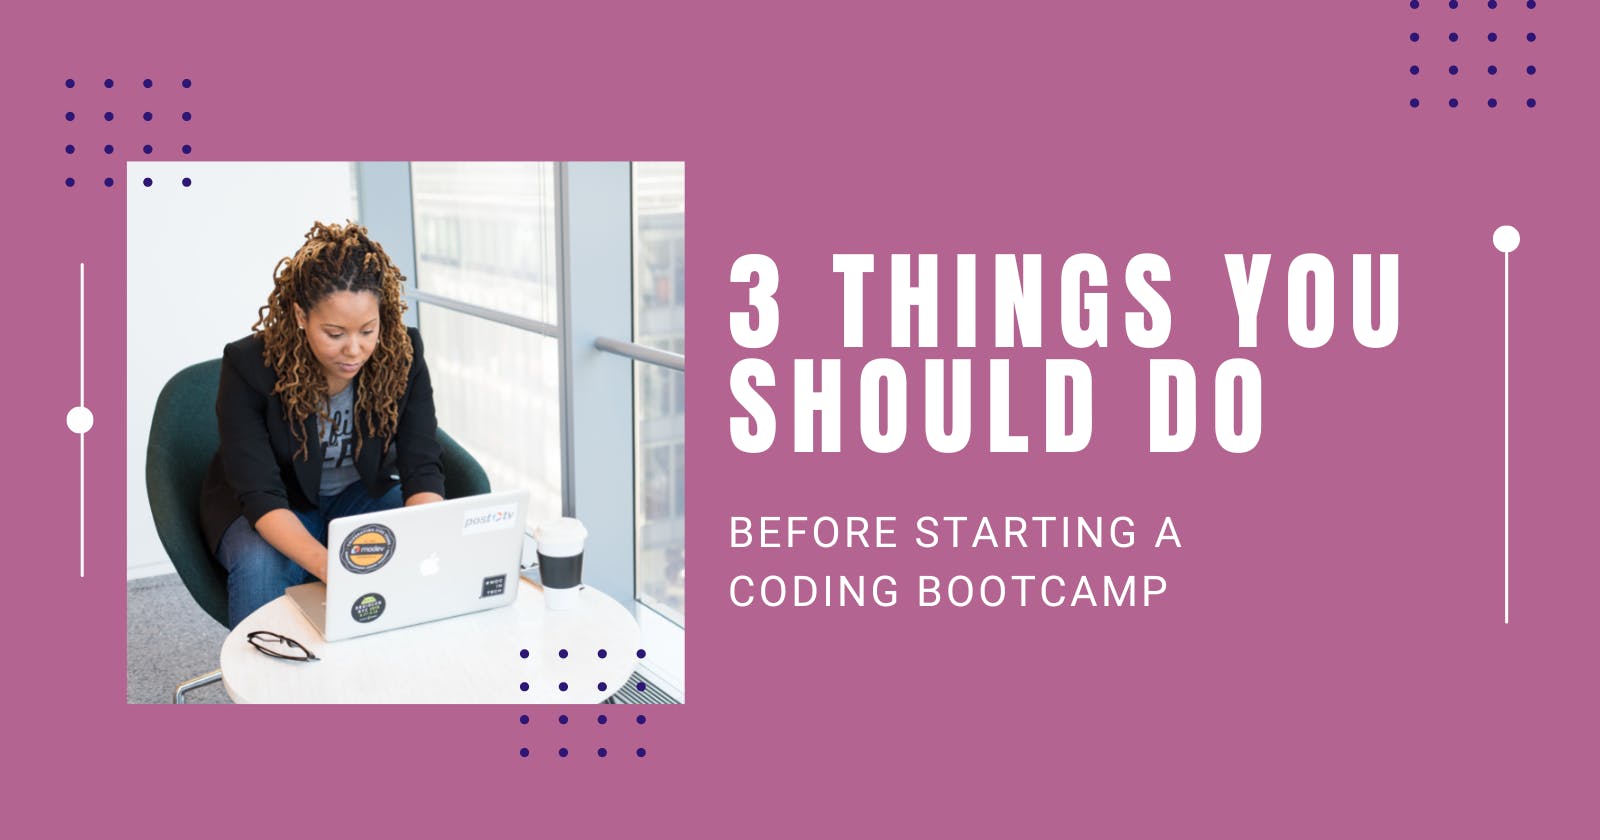 3 Things You Should Do Before Starting a Coding Bootcamp